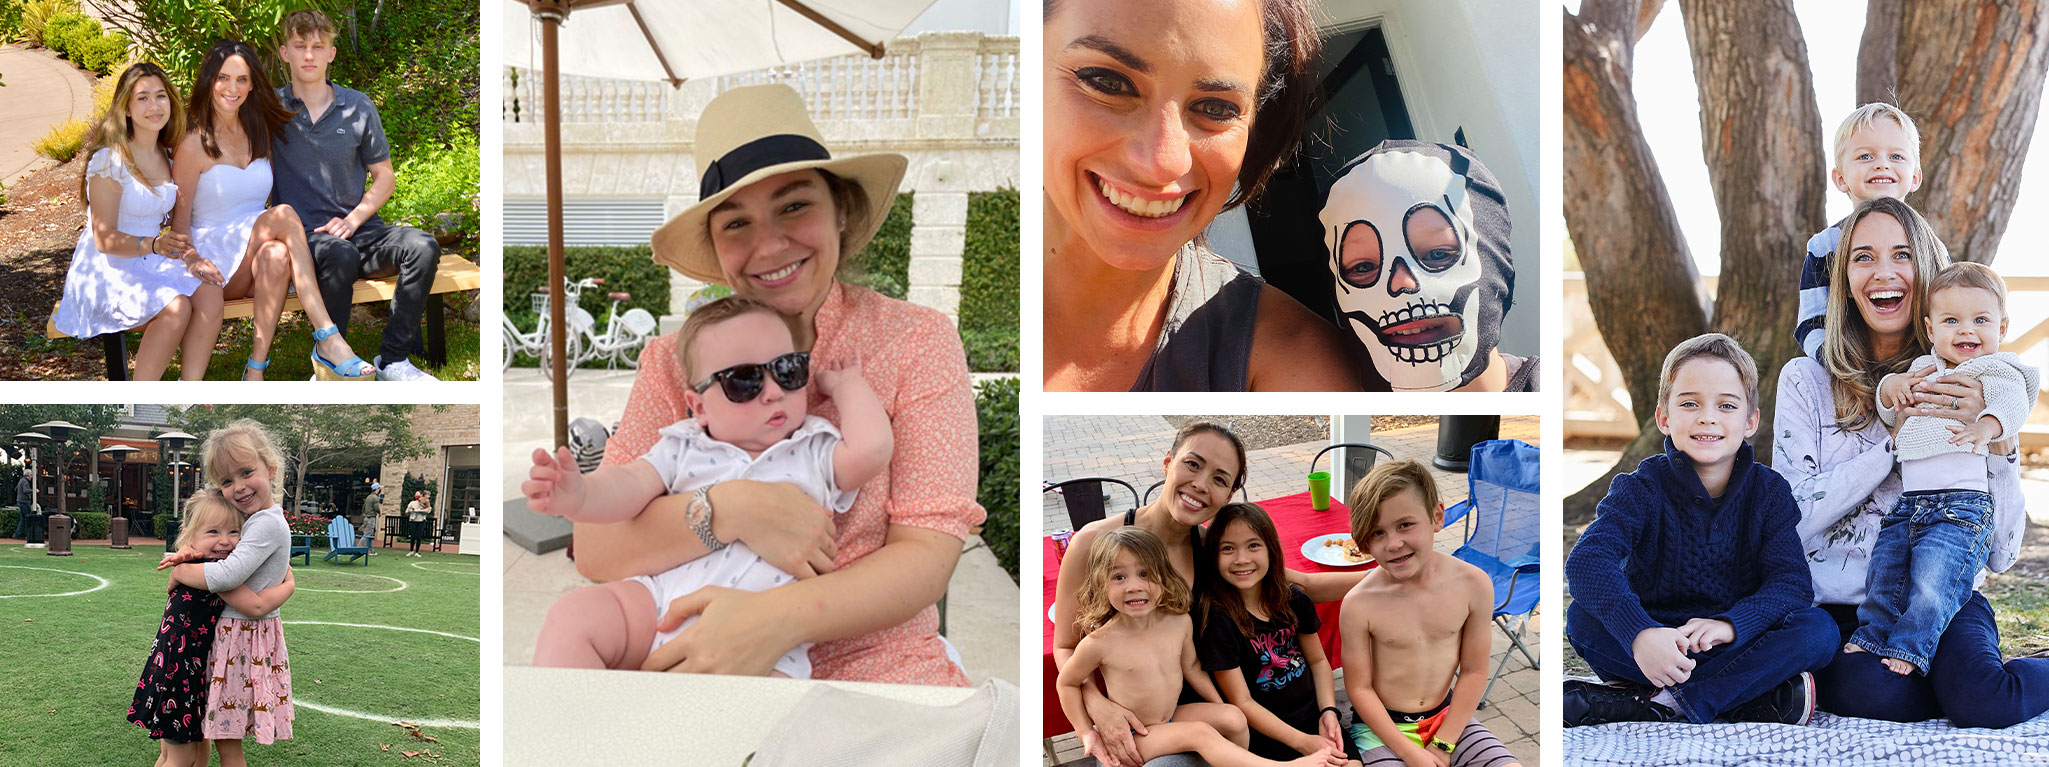 Instagram vs. Reality: Mother's Day Edition